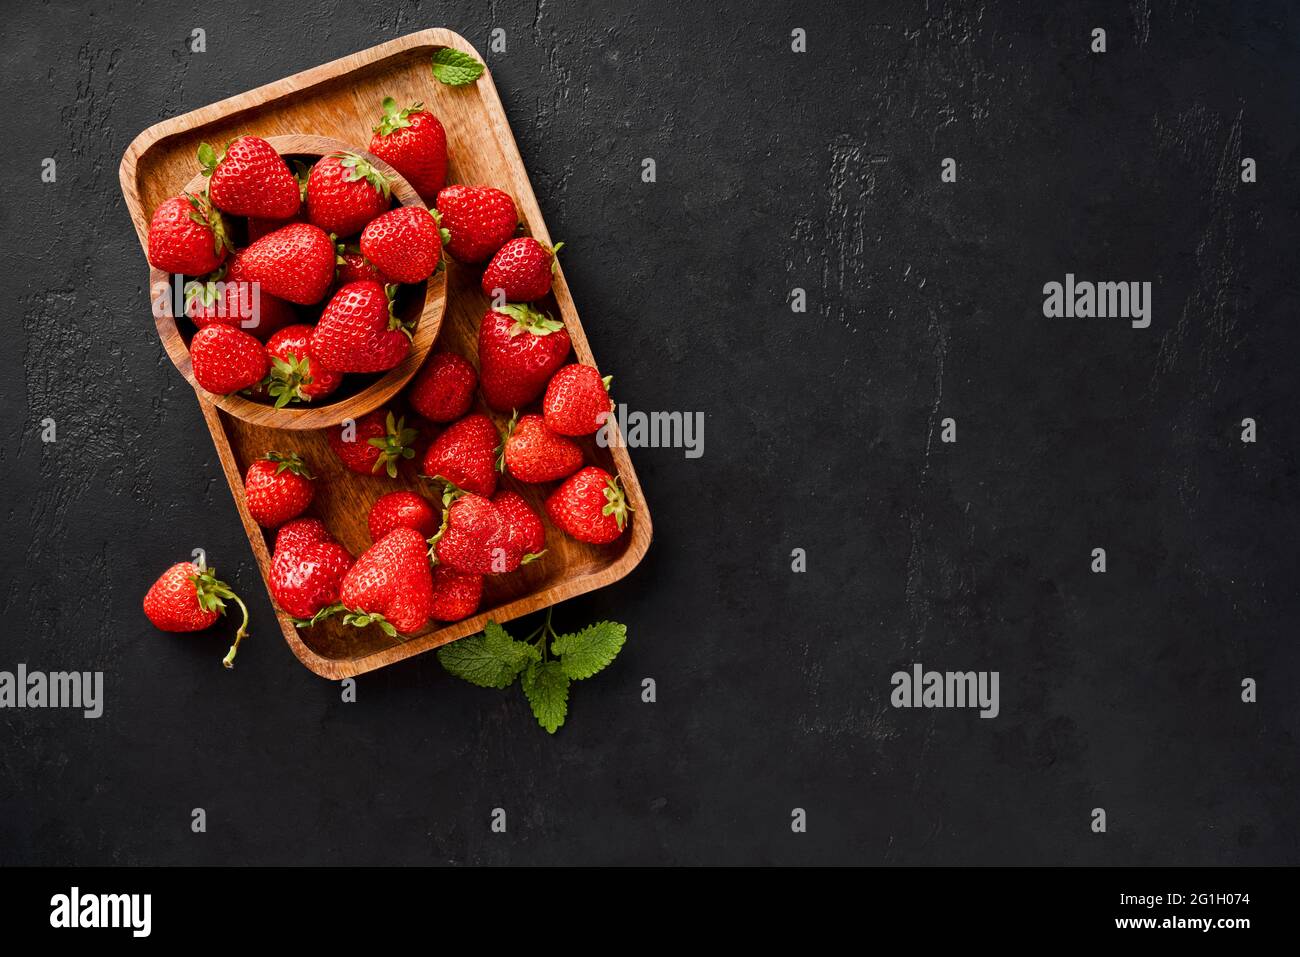 Fresh strawberry on a black concrete background. Strawberries with leaves on wooden plate. Stock Photo